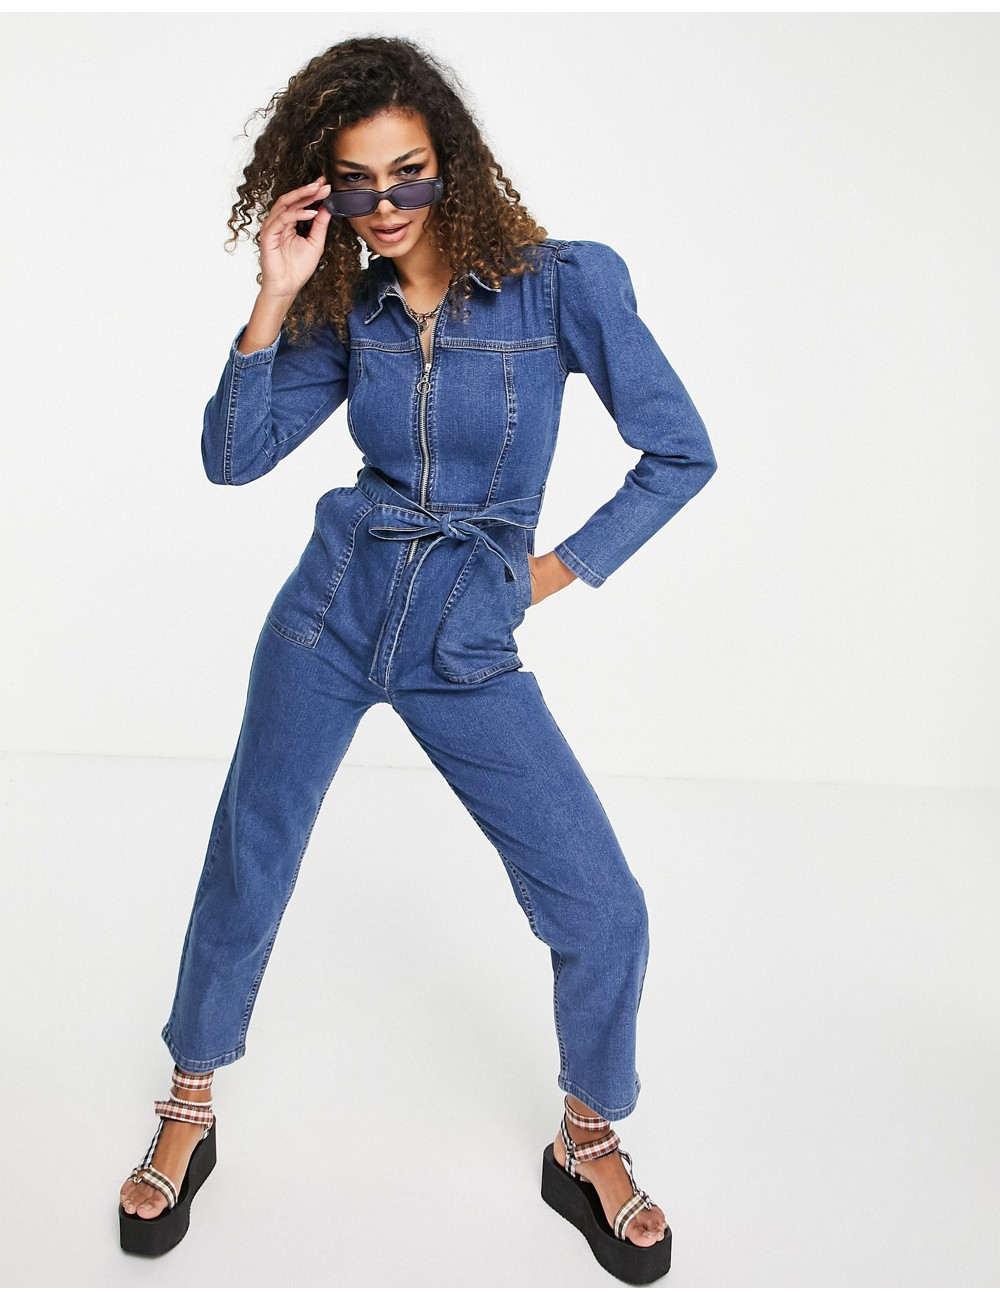 Urban Bliss boilersuit with...